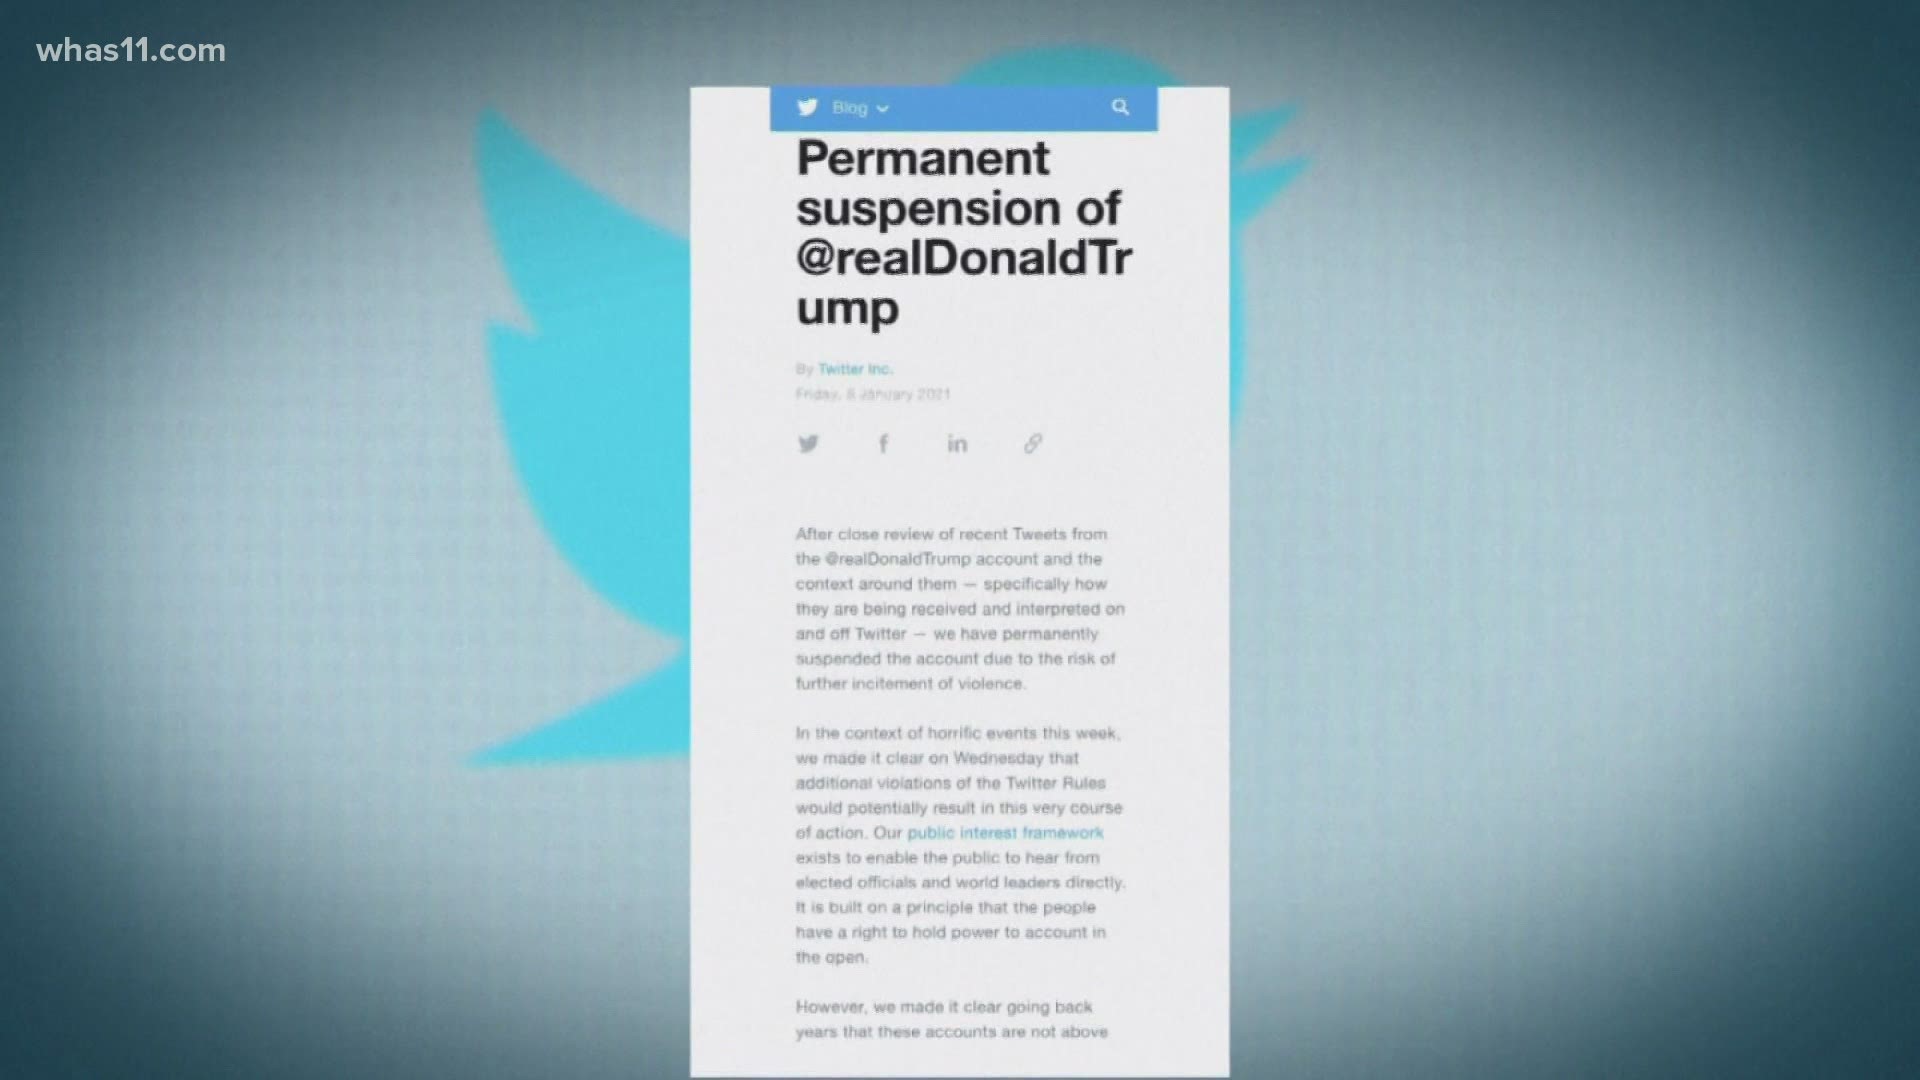 'Due to the risk of further incitement of violence,' Twitter said it has suspended President Trump's personal account.